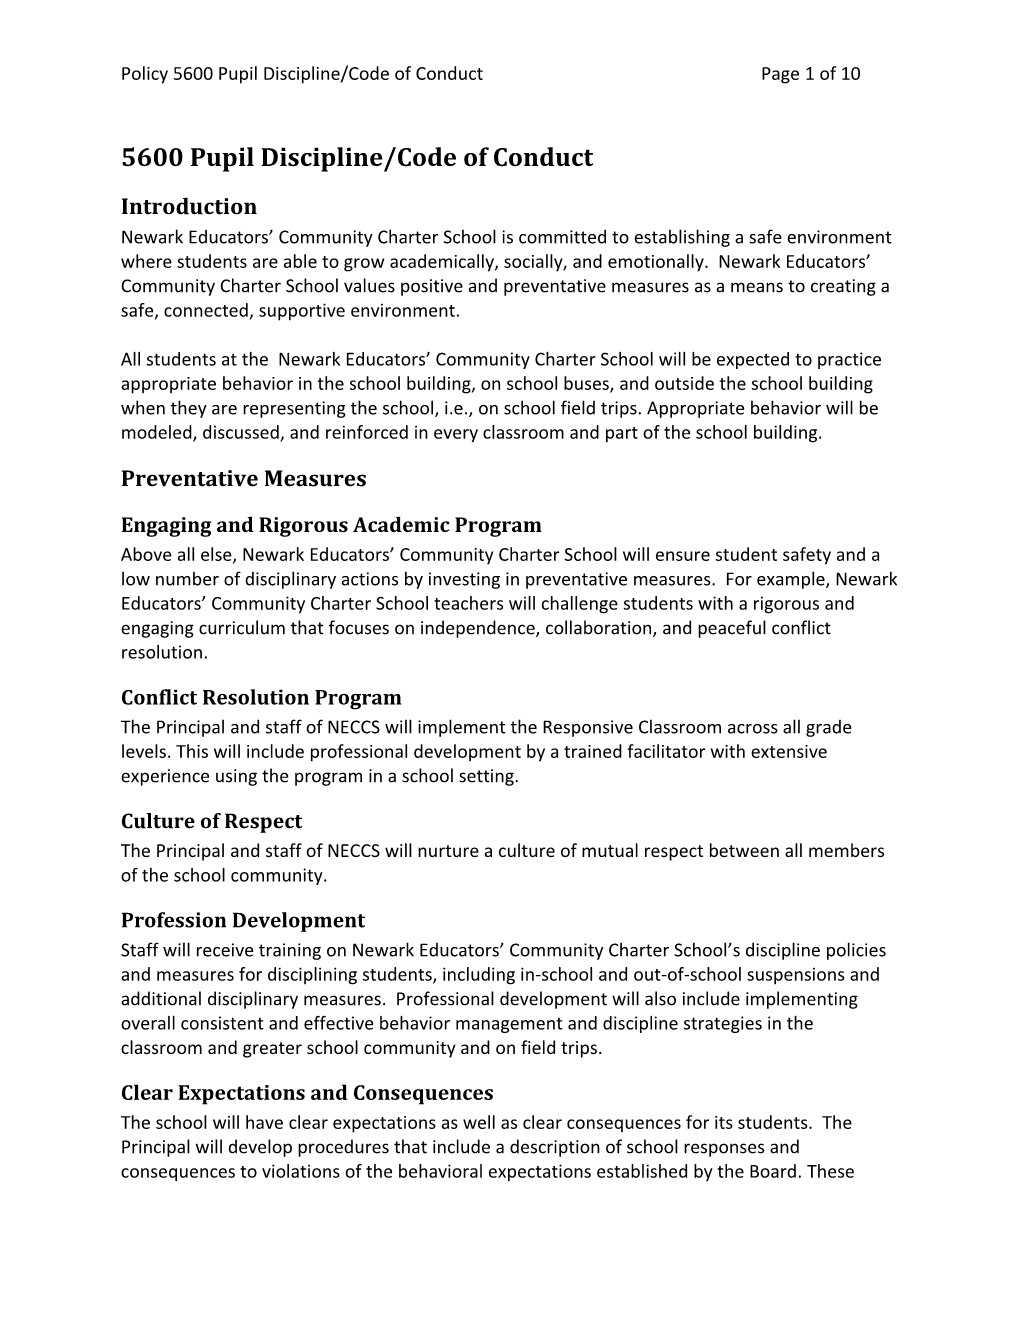 Policy 5600 Pupil Discipline/Code of Conductpage 1 of 10